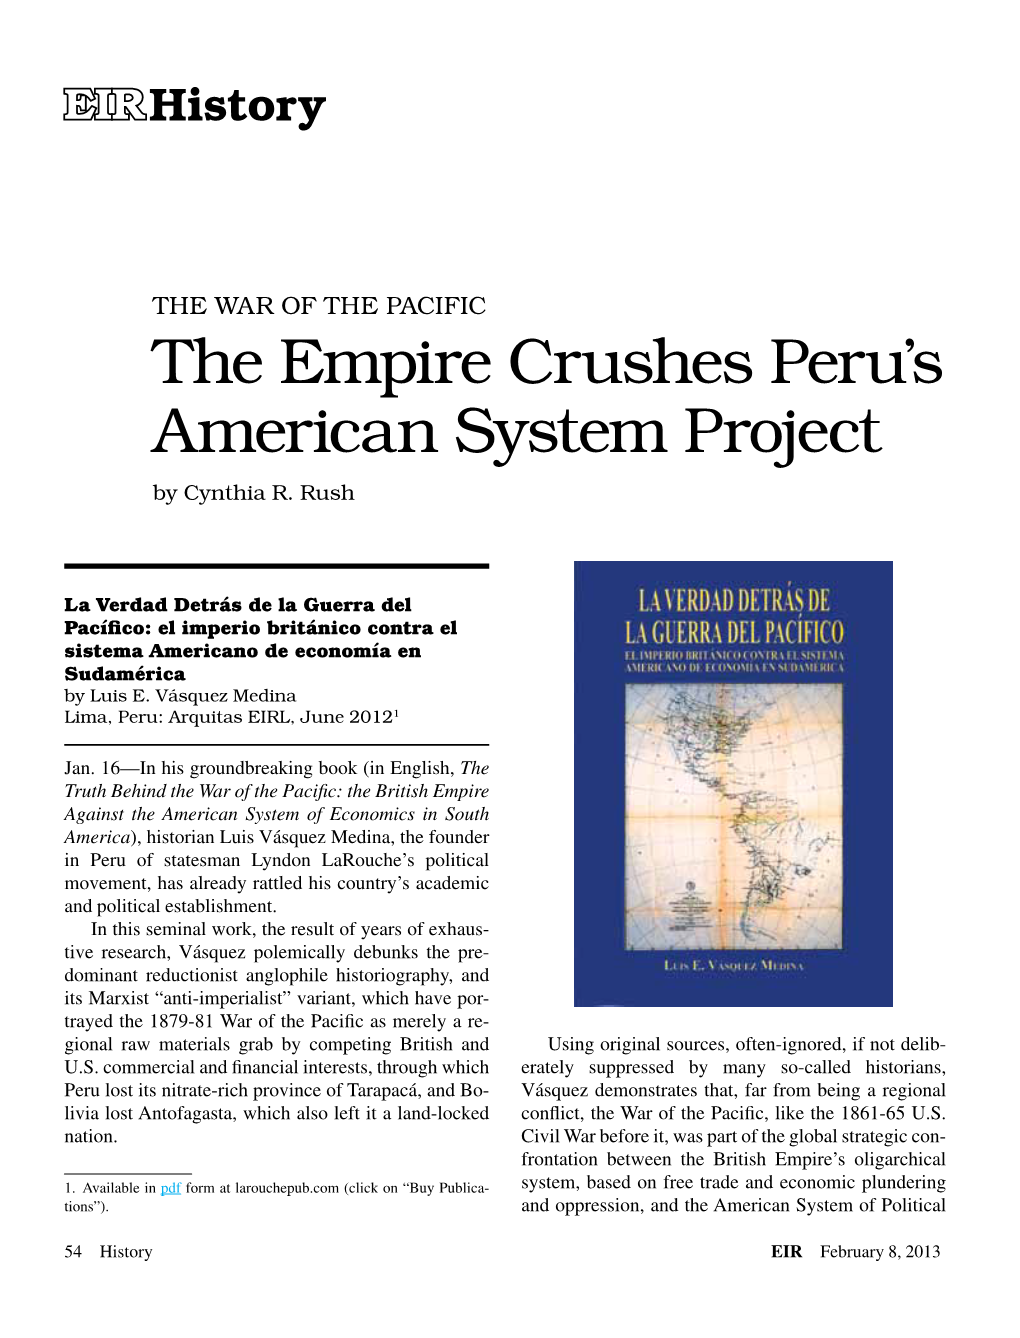 The War of the Pacific: the Empire Crushes Peru's American System